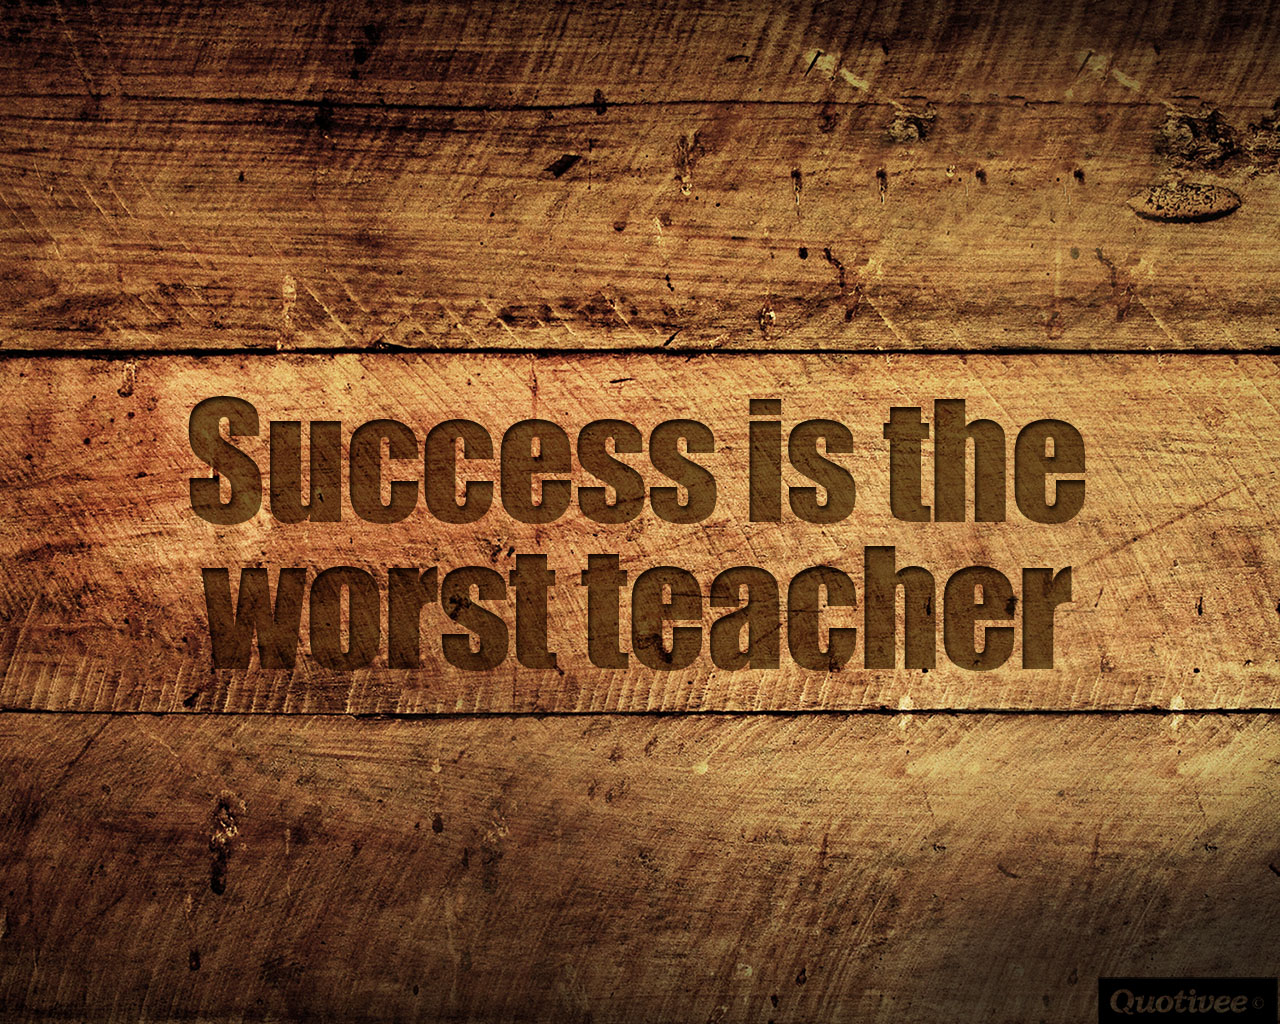 Motivational Wallpaper on Success: Quote on SuccessSuccess is the worst tea...